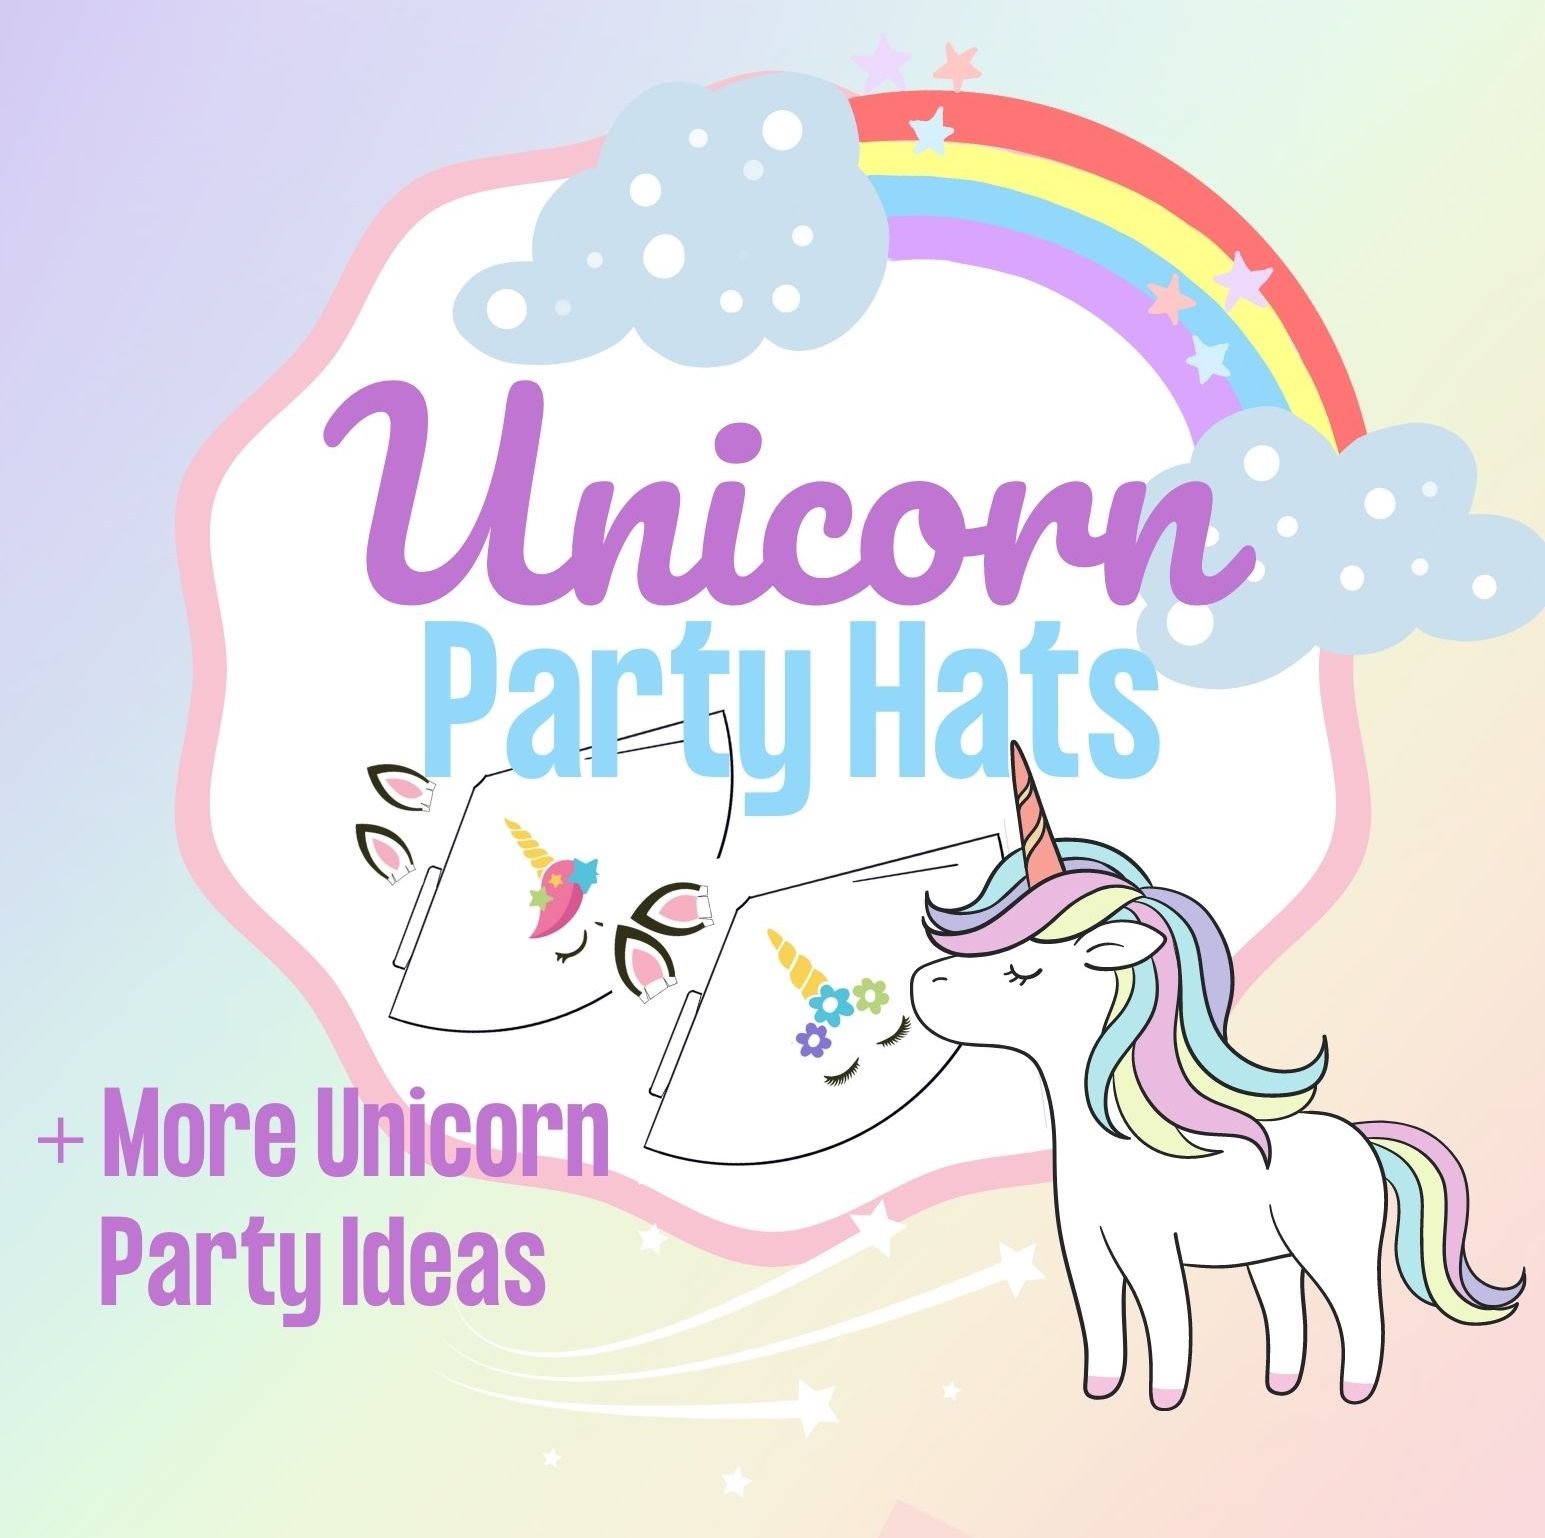 Unicorn Party Hats and More Unicorn Party Ideas